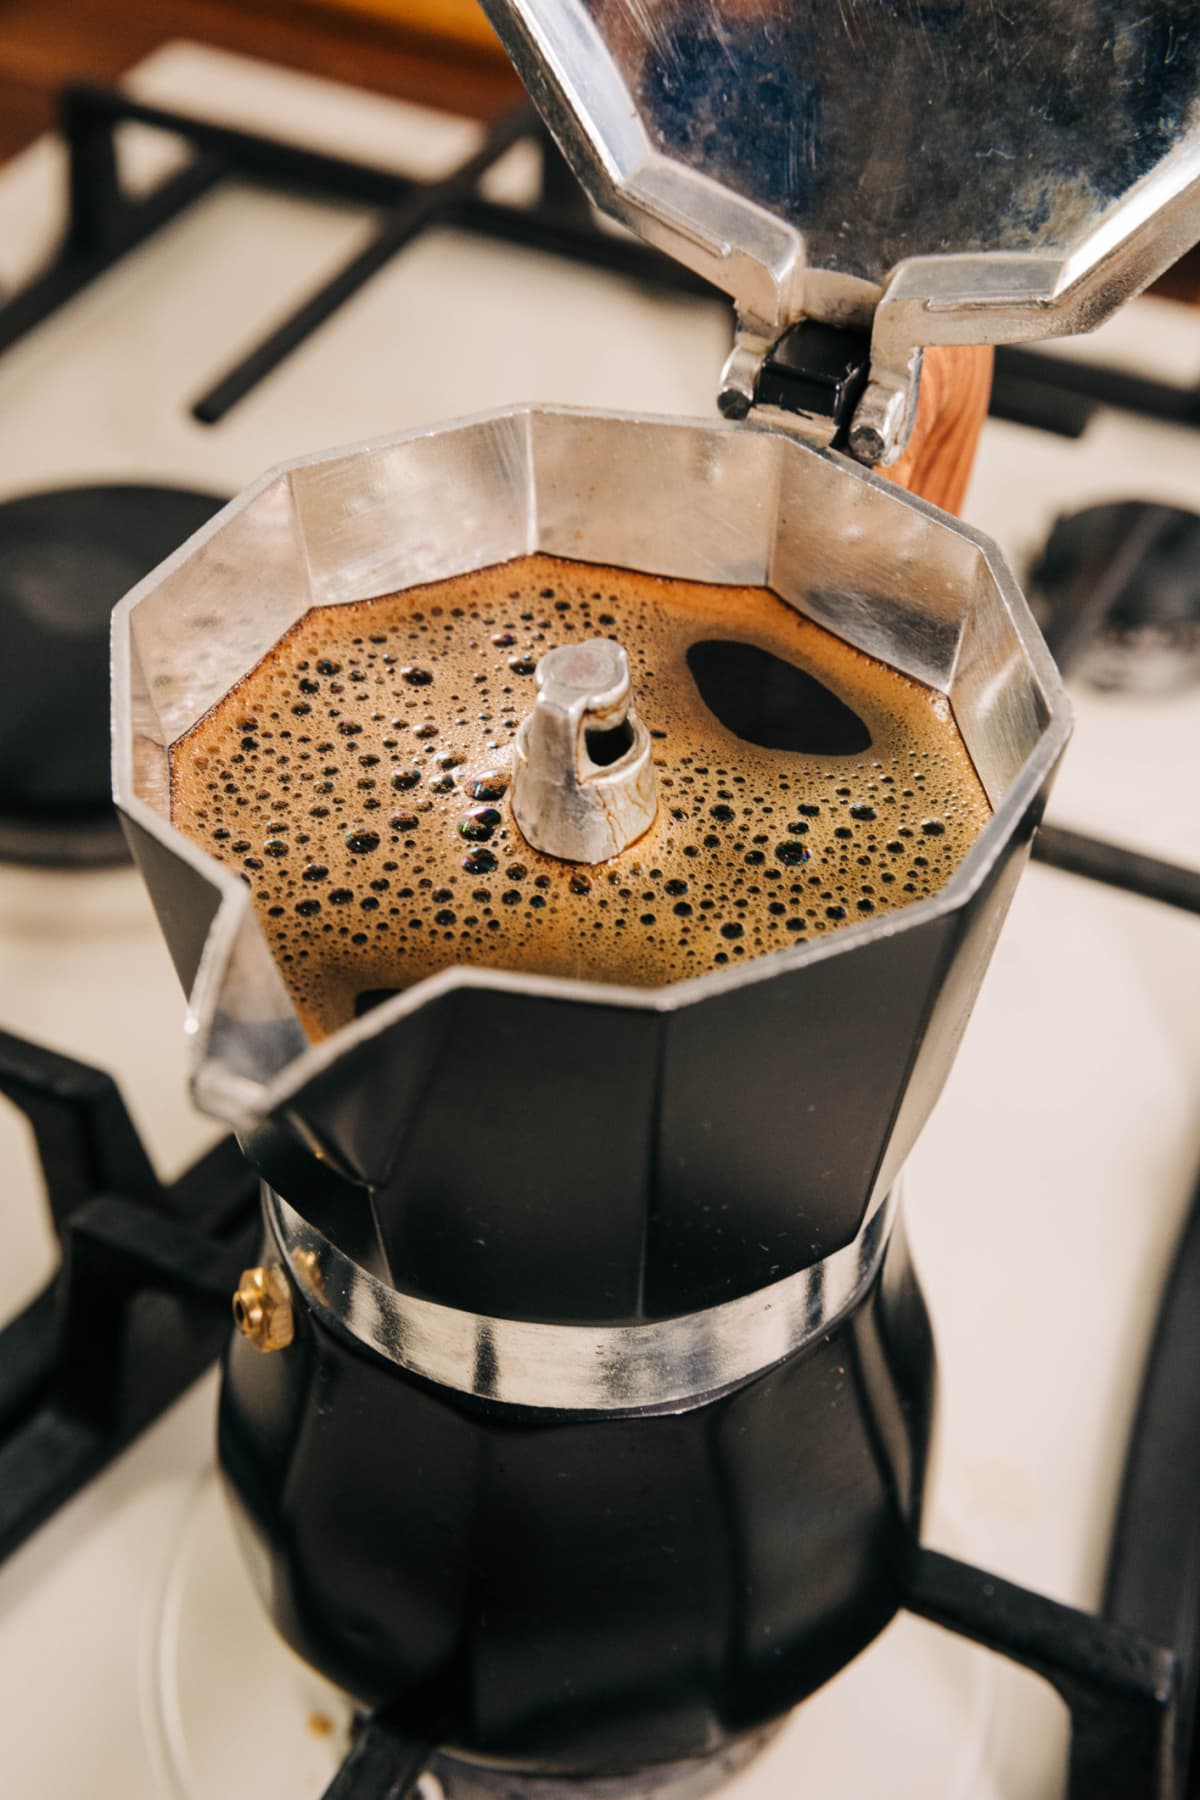 What Is A Moka Coffee Pot, And How Exactly Does It Work?